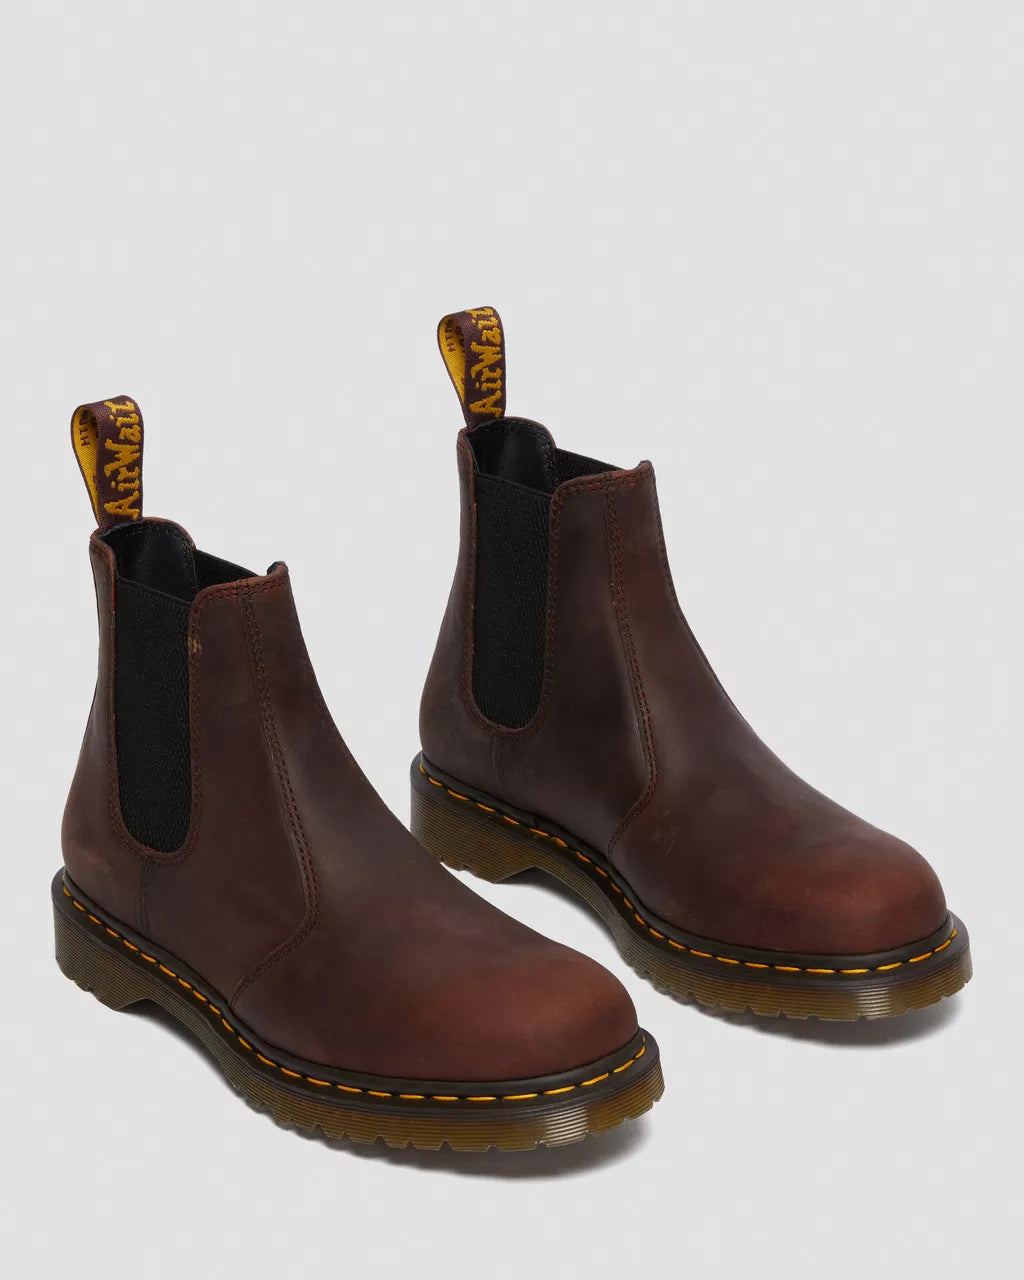 DR MARTENS 2976 WAXED FULL GRAIN LEATHER CHELSEA BOOTS - CHESTNUT BROWN190665542660